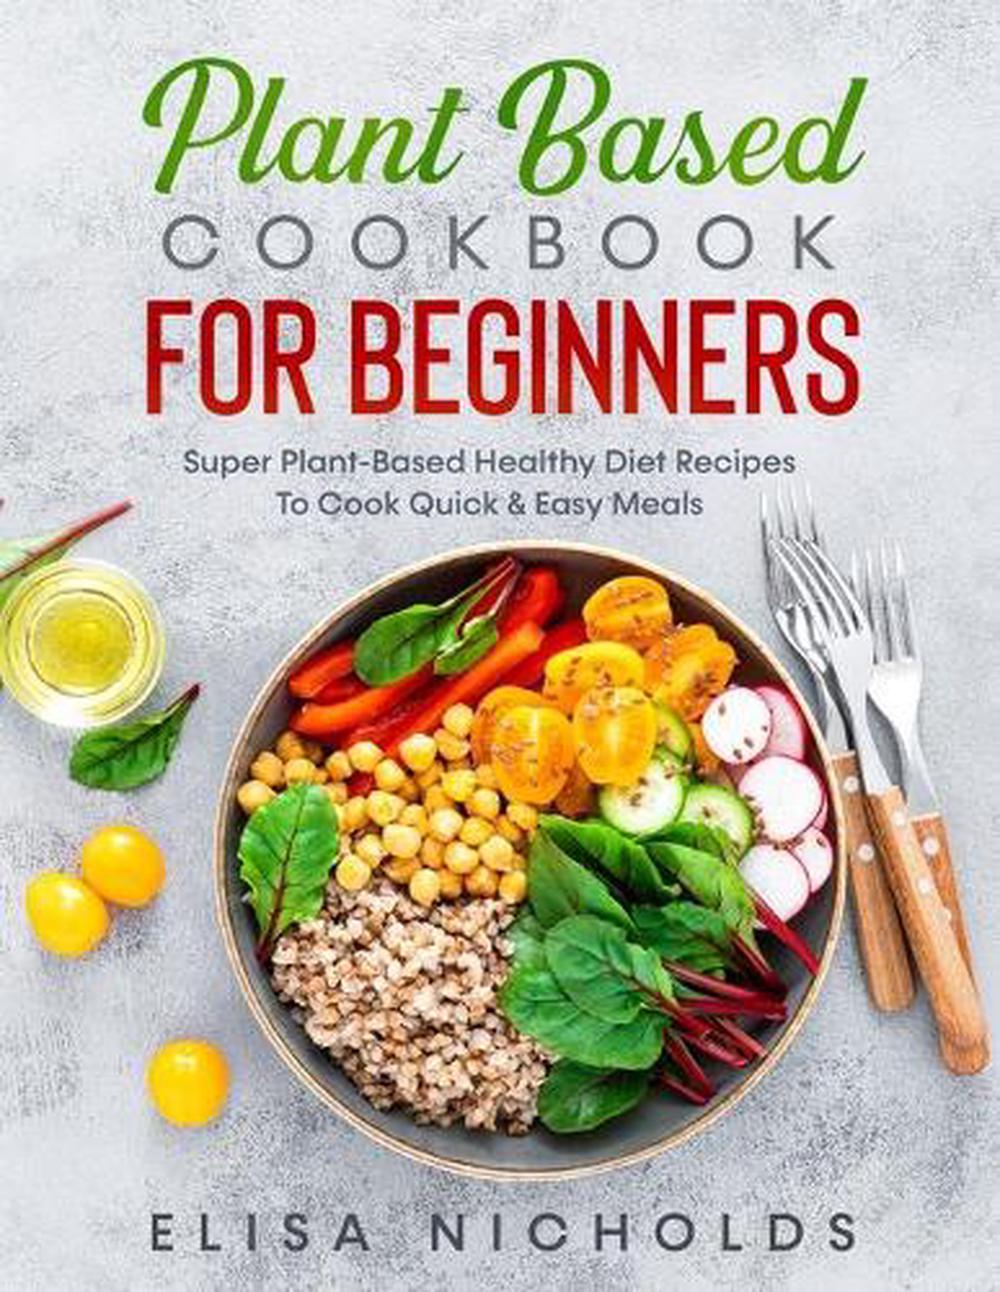 Plant Based Cookbook for Beginners by Elisa Nicholds (English ...